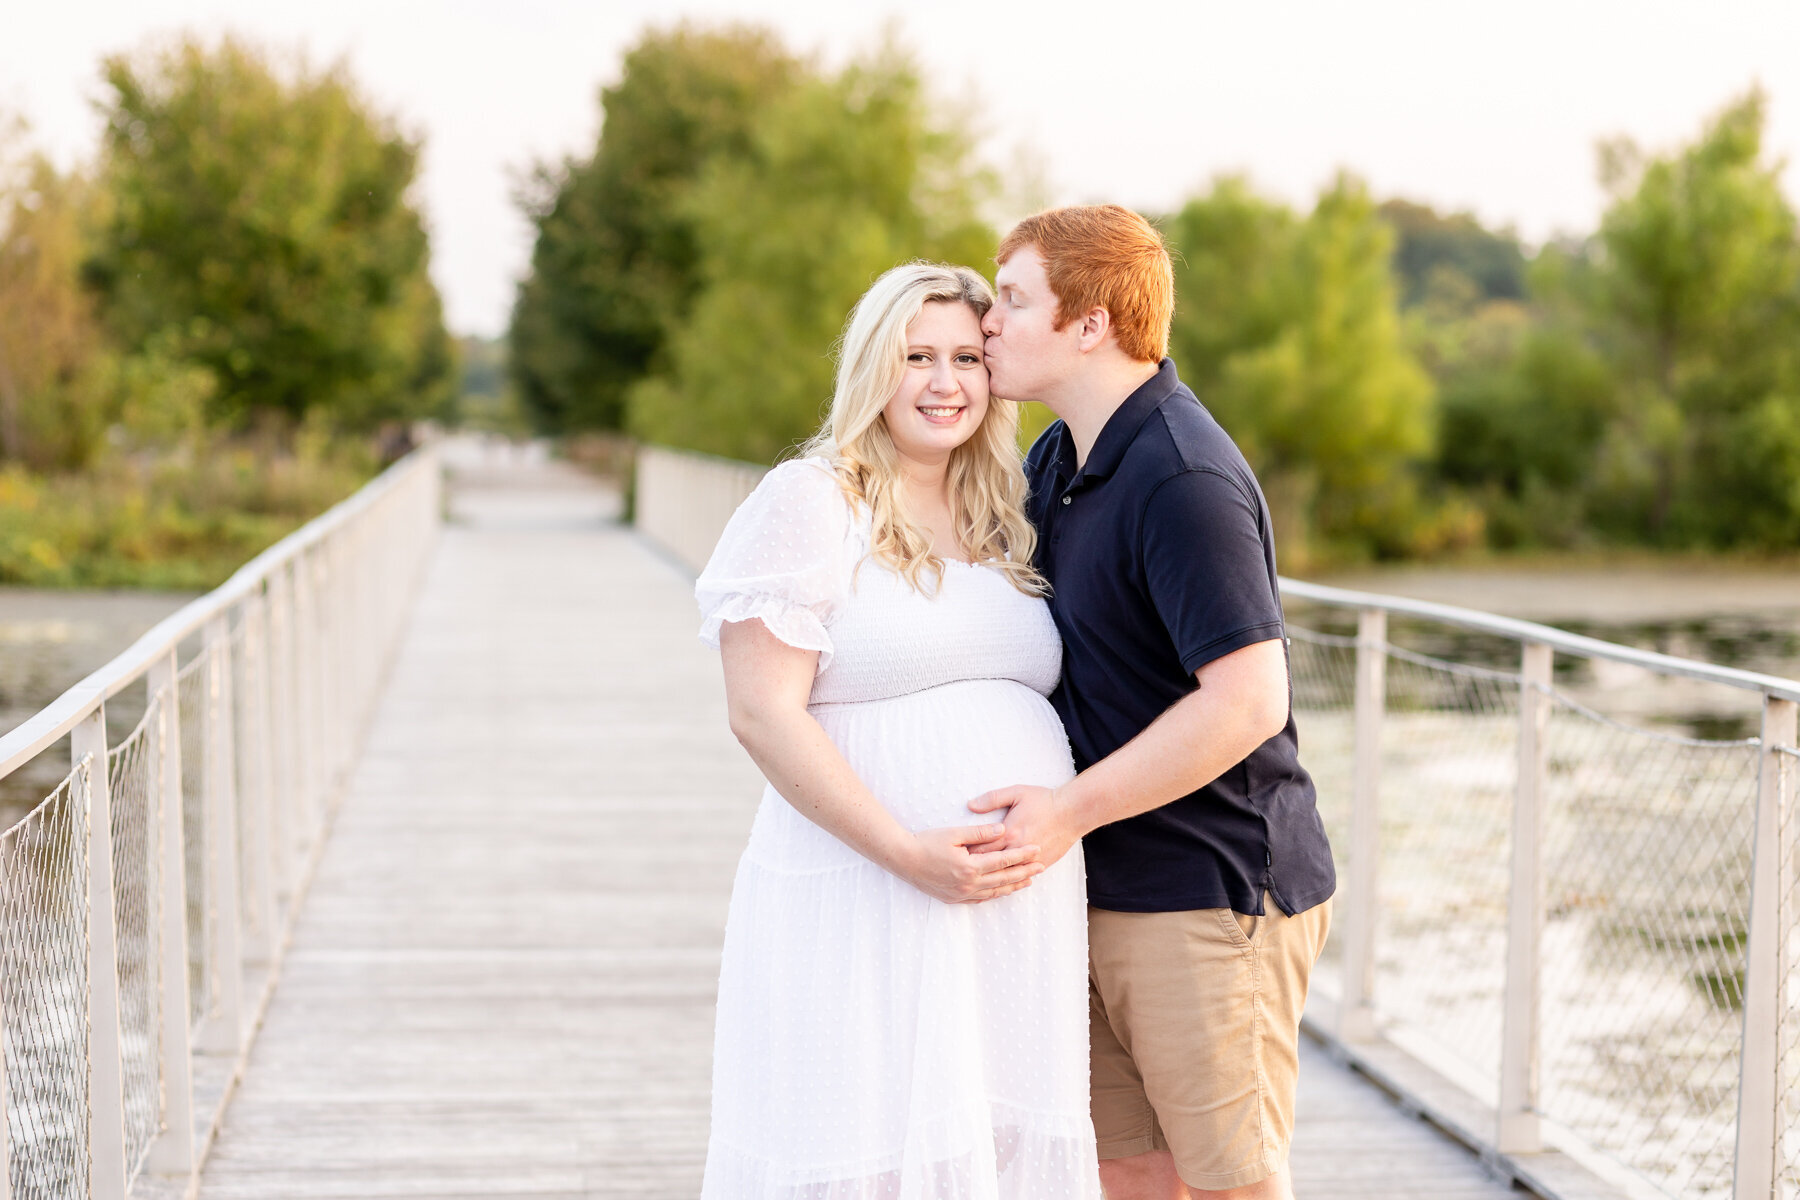 outdoor_maternity_photography_session_Louisville_KY_photographer_golden_hour-2